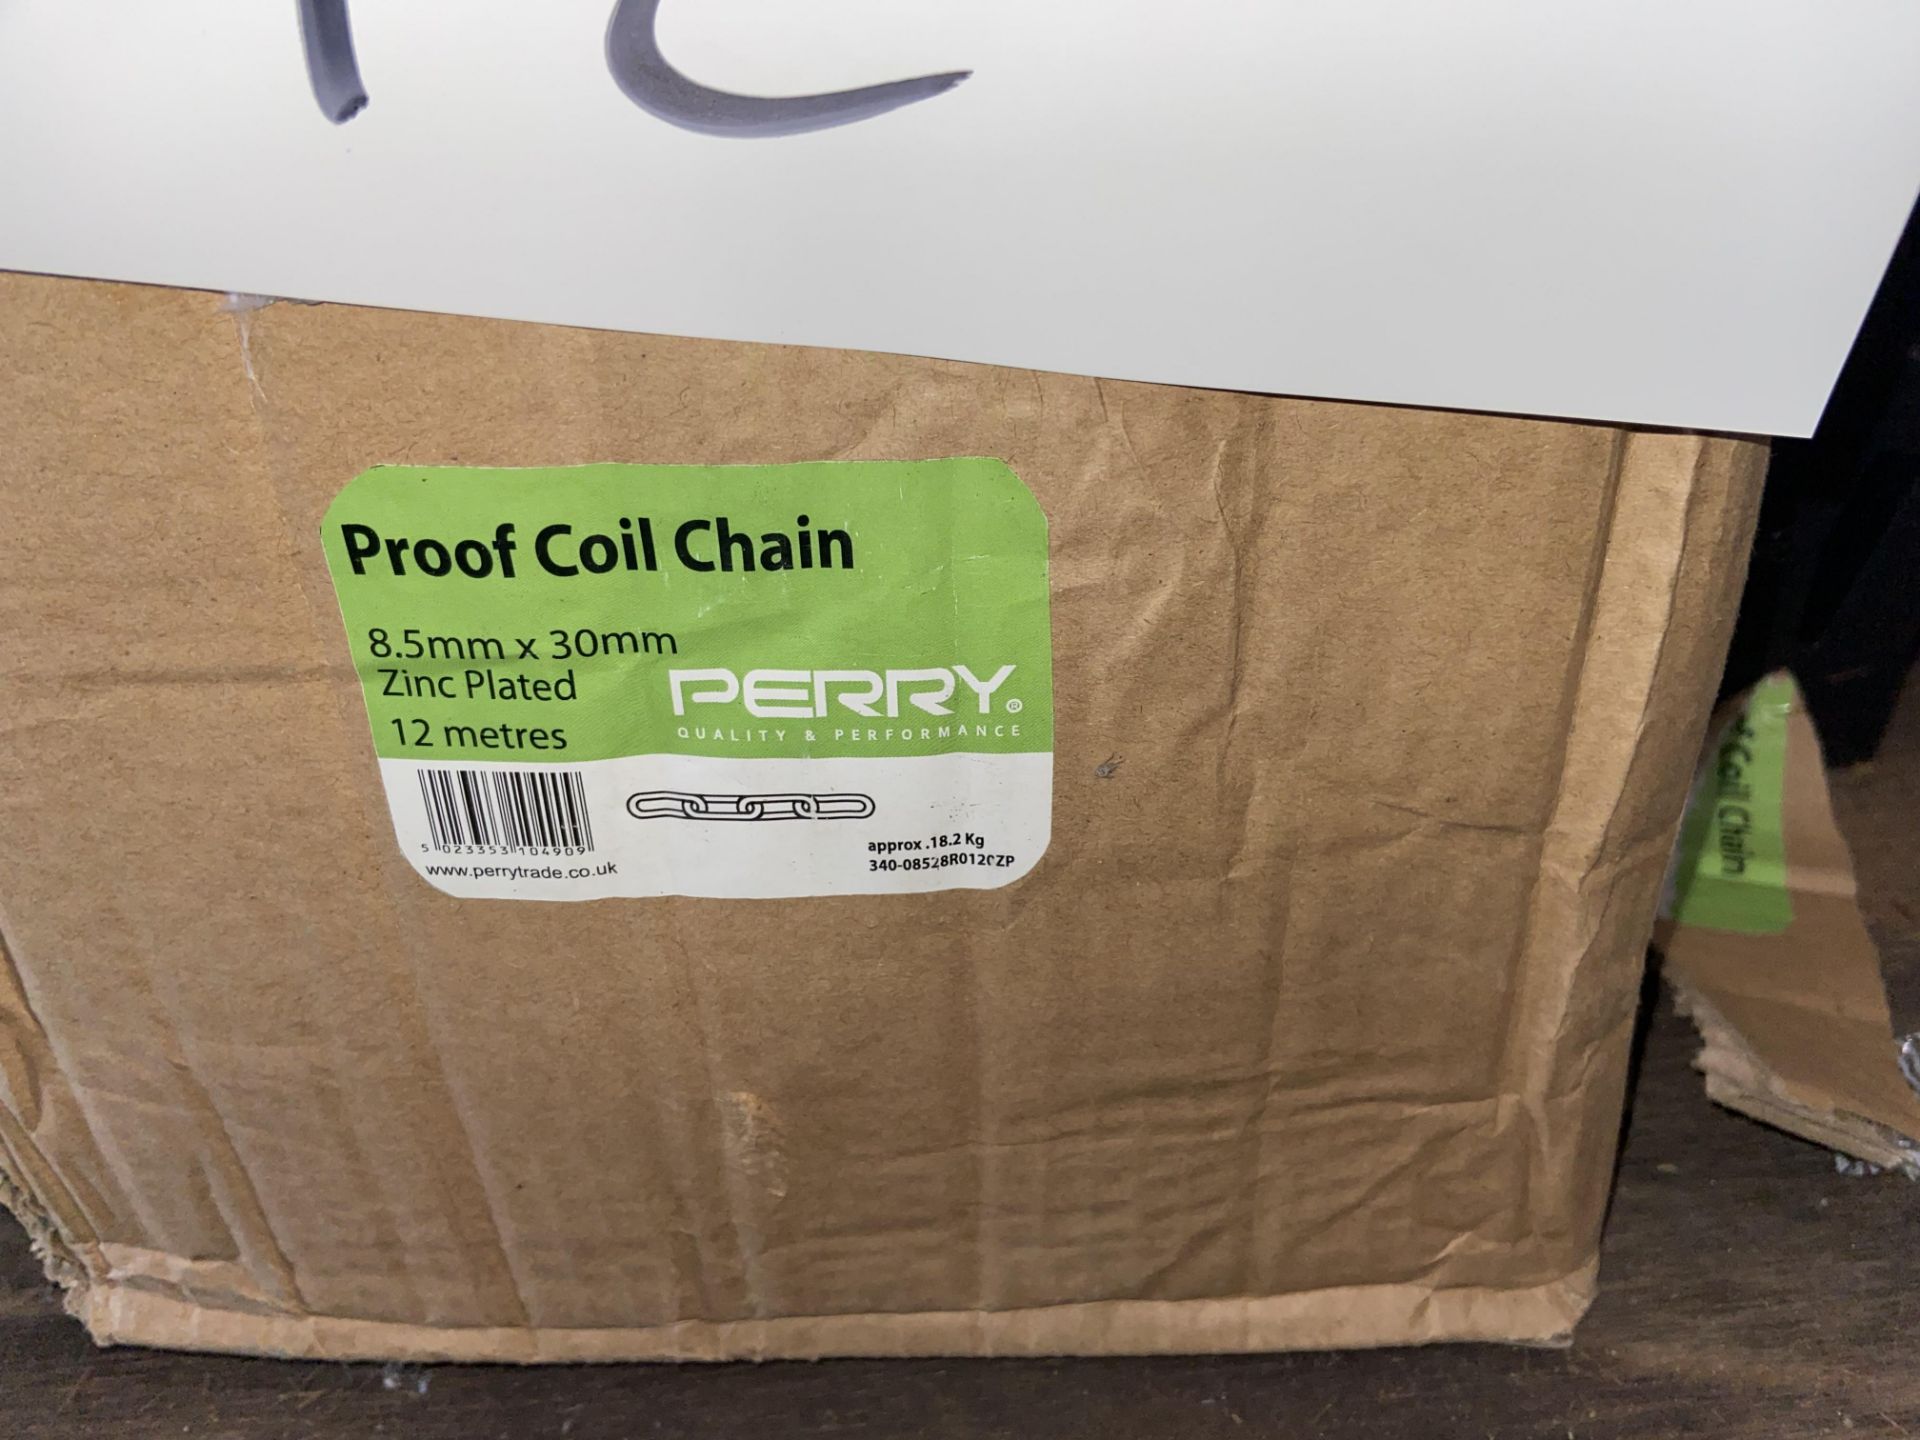 Six Boxes of Perry Zinc Plated Proof Coil Chain, 8.5mm x 30mm x 12mPlease read the following - Image 2 of 2